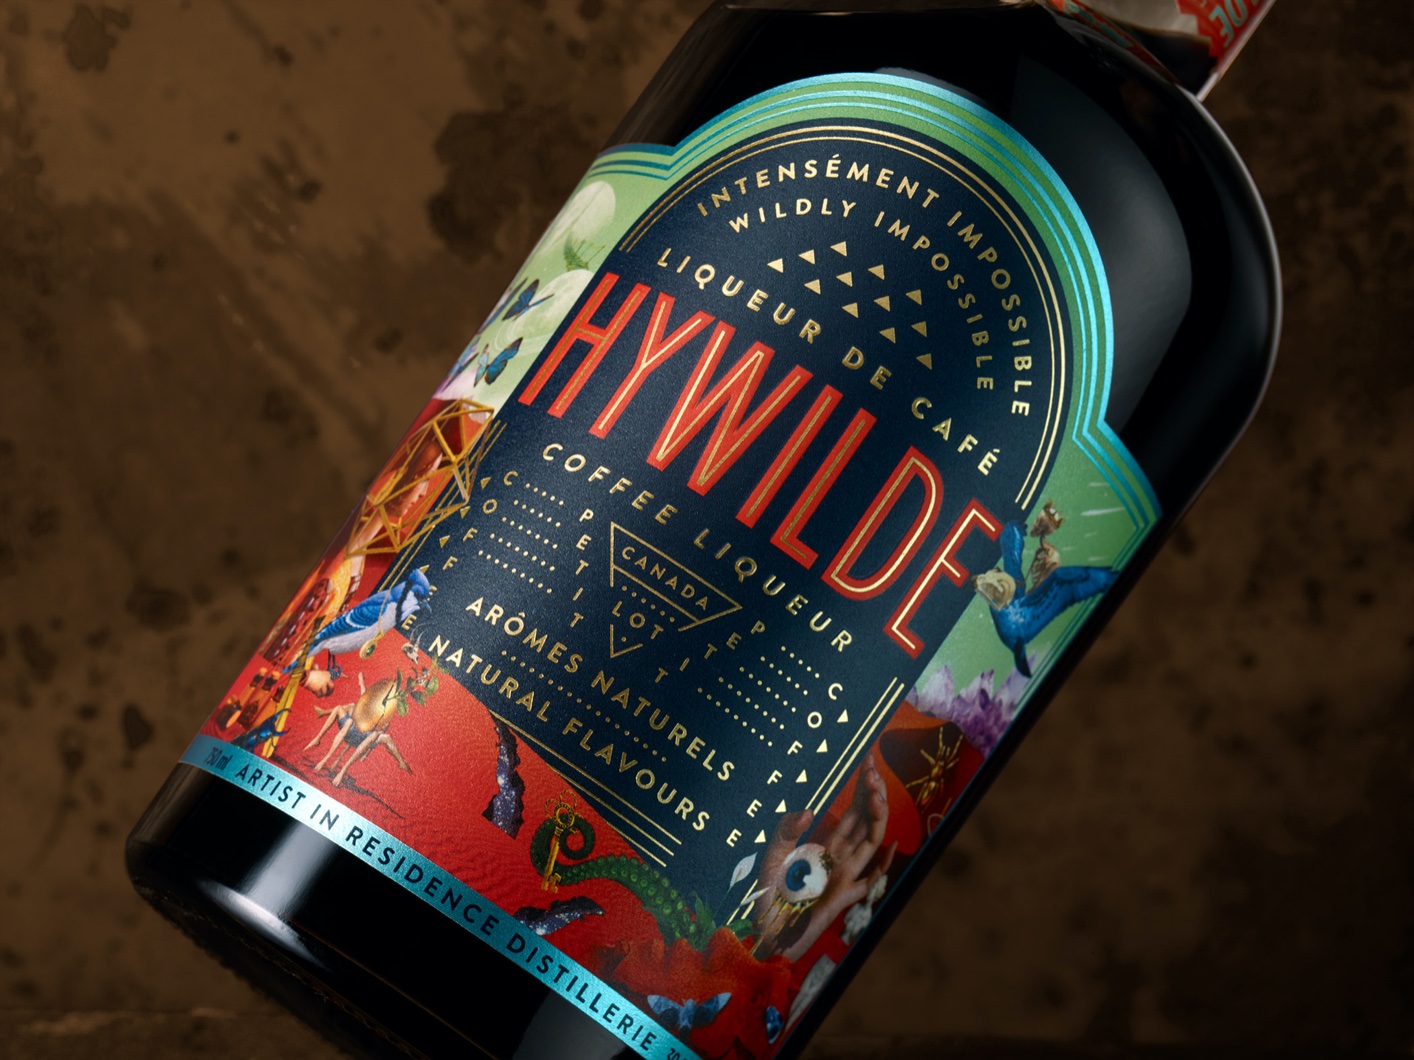 Hywilde Is A Coffee Liqueur We All Need In Our Bar Cart